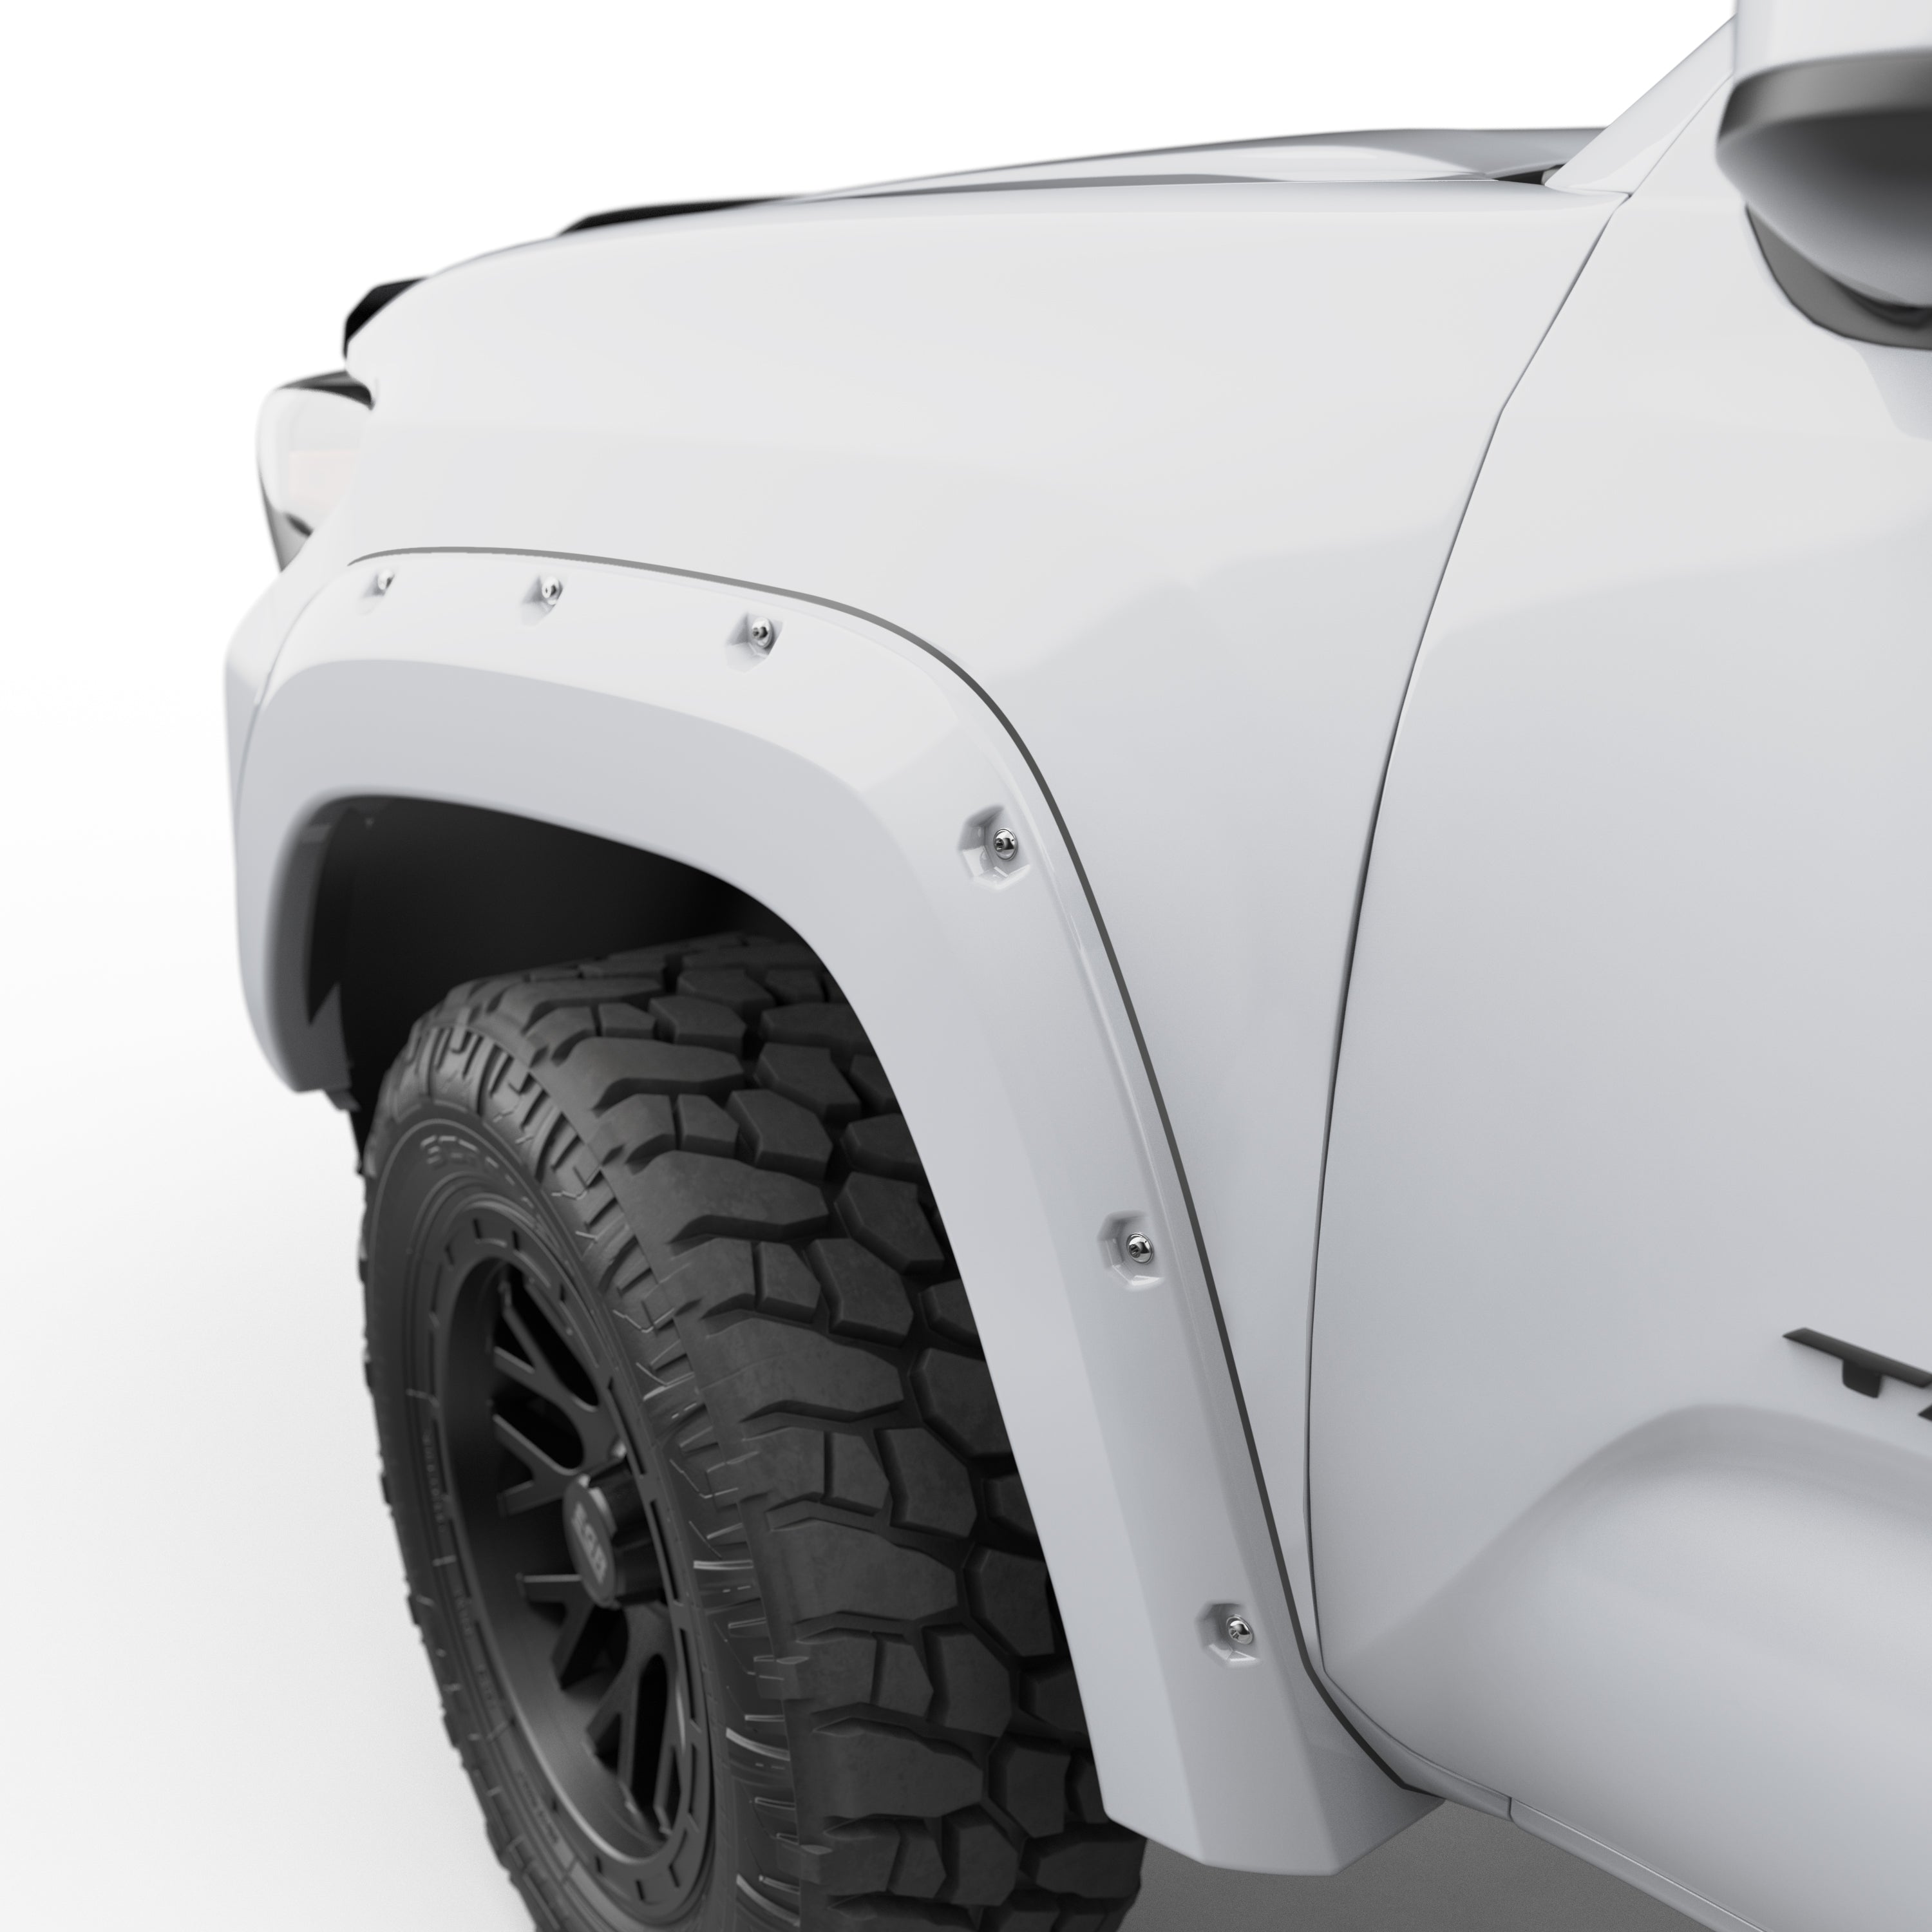 EGR 2016-2023 Toyota Tacoma 4 Door Extended Cab Crew Cab Pickup Traditional bolt-on look Fender Flares set of 4 Paint to Code White 795084-040